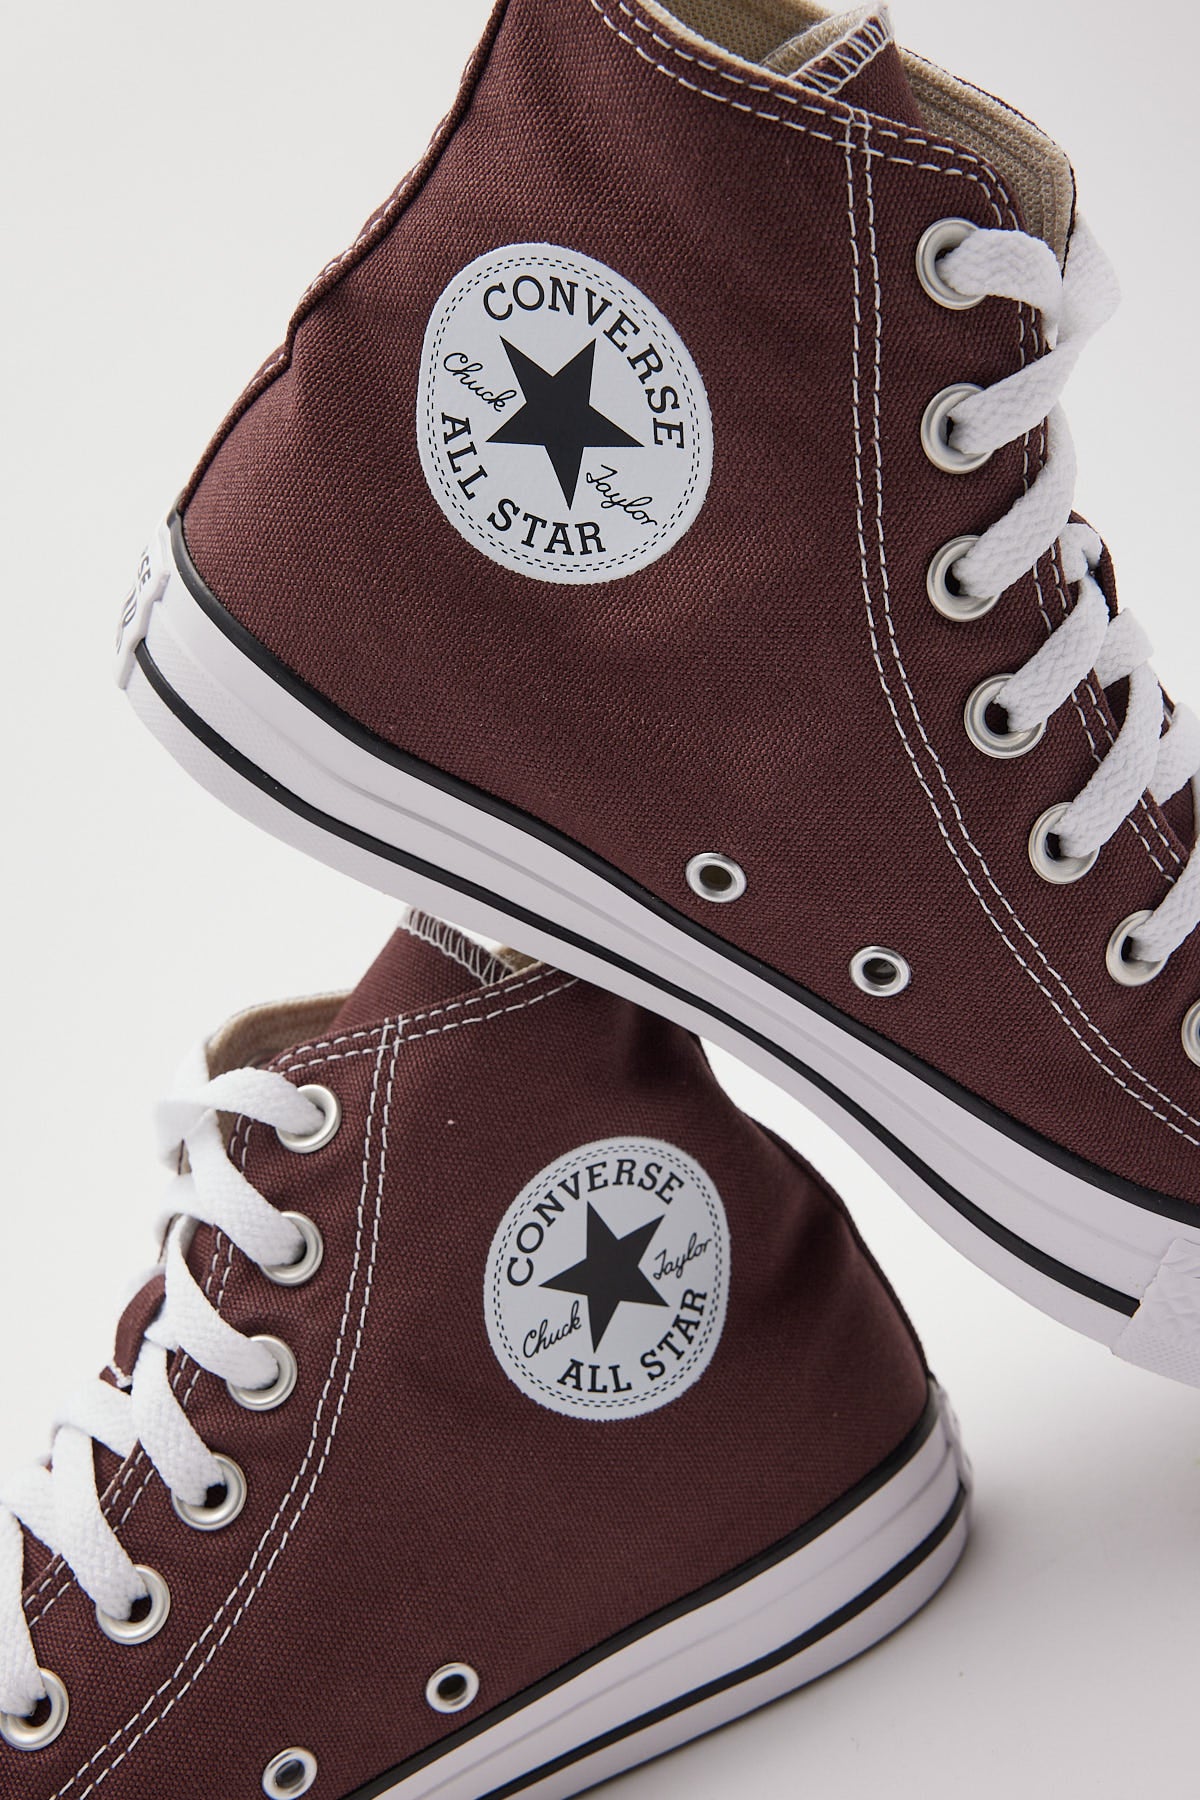 16 Elevated Converse Outfits That Look So Darn Good